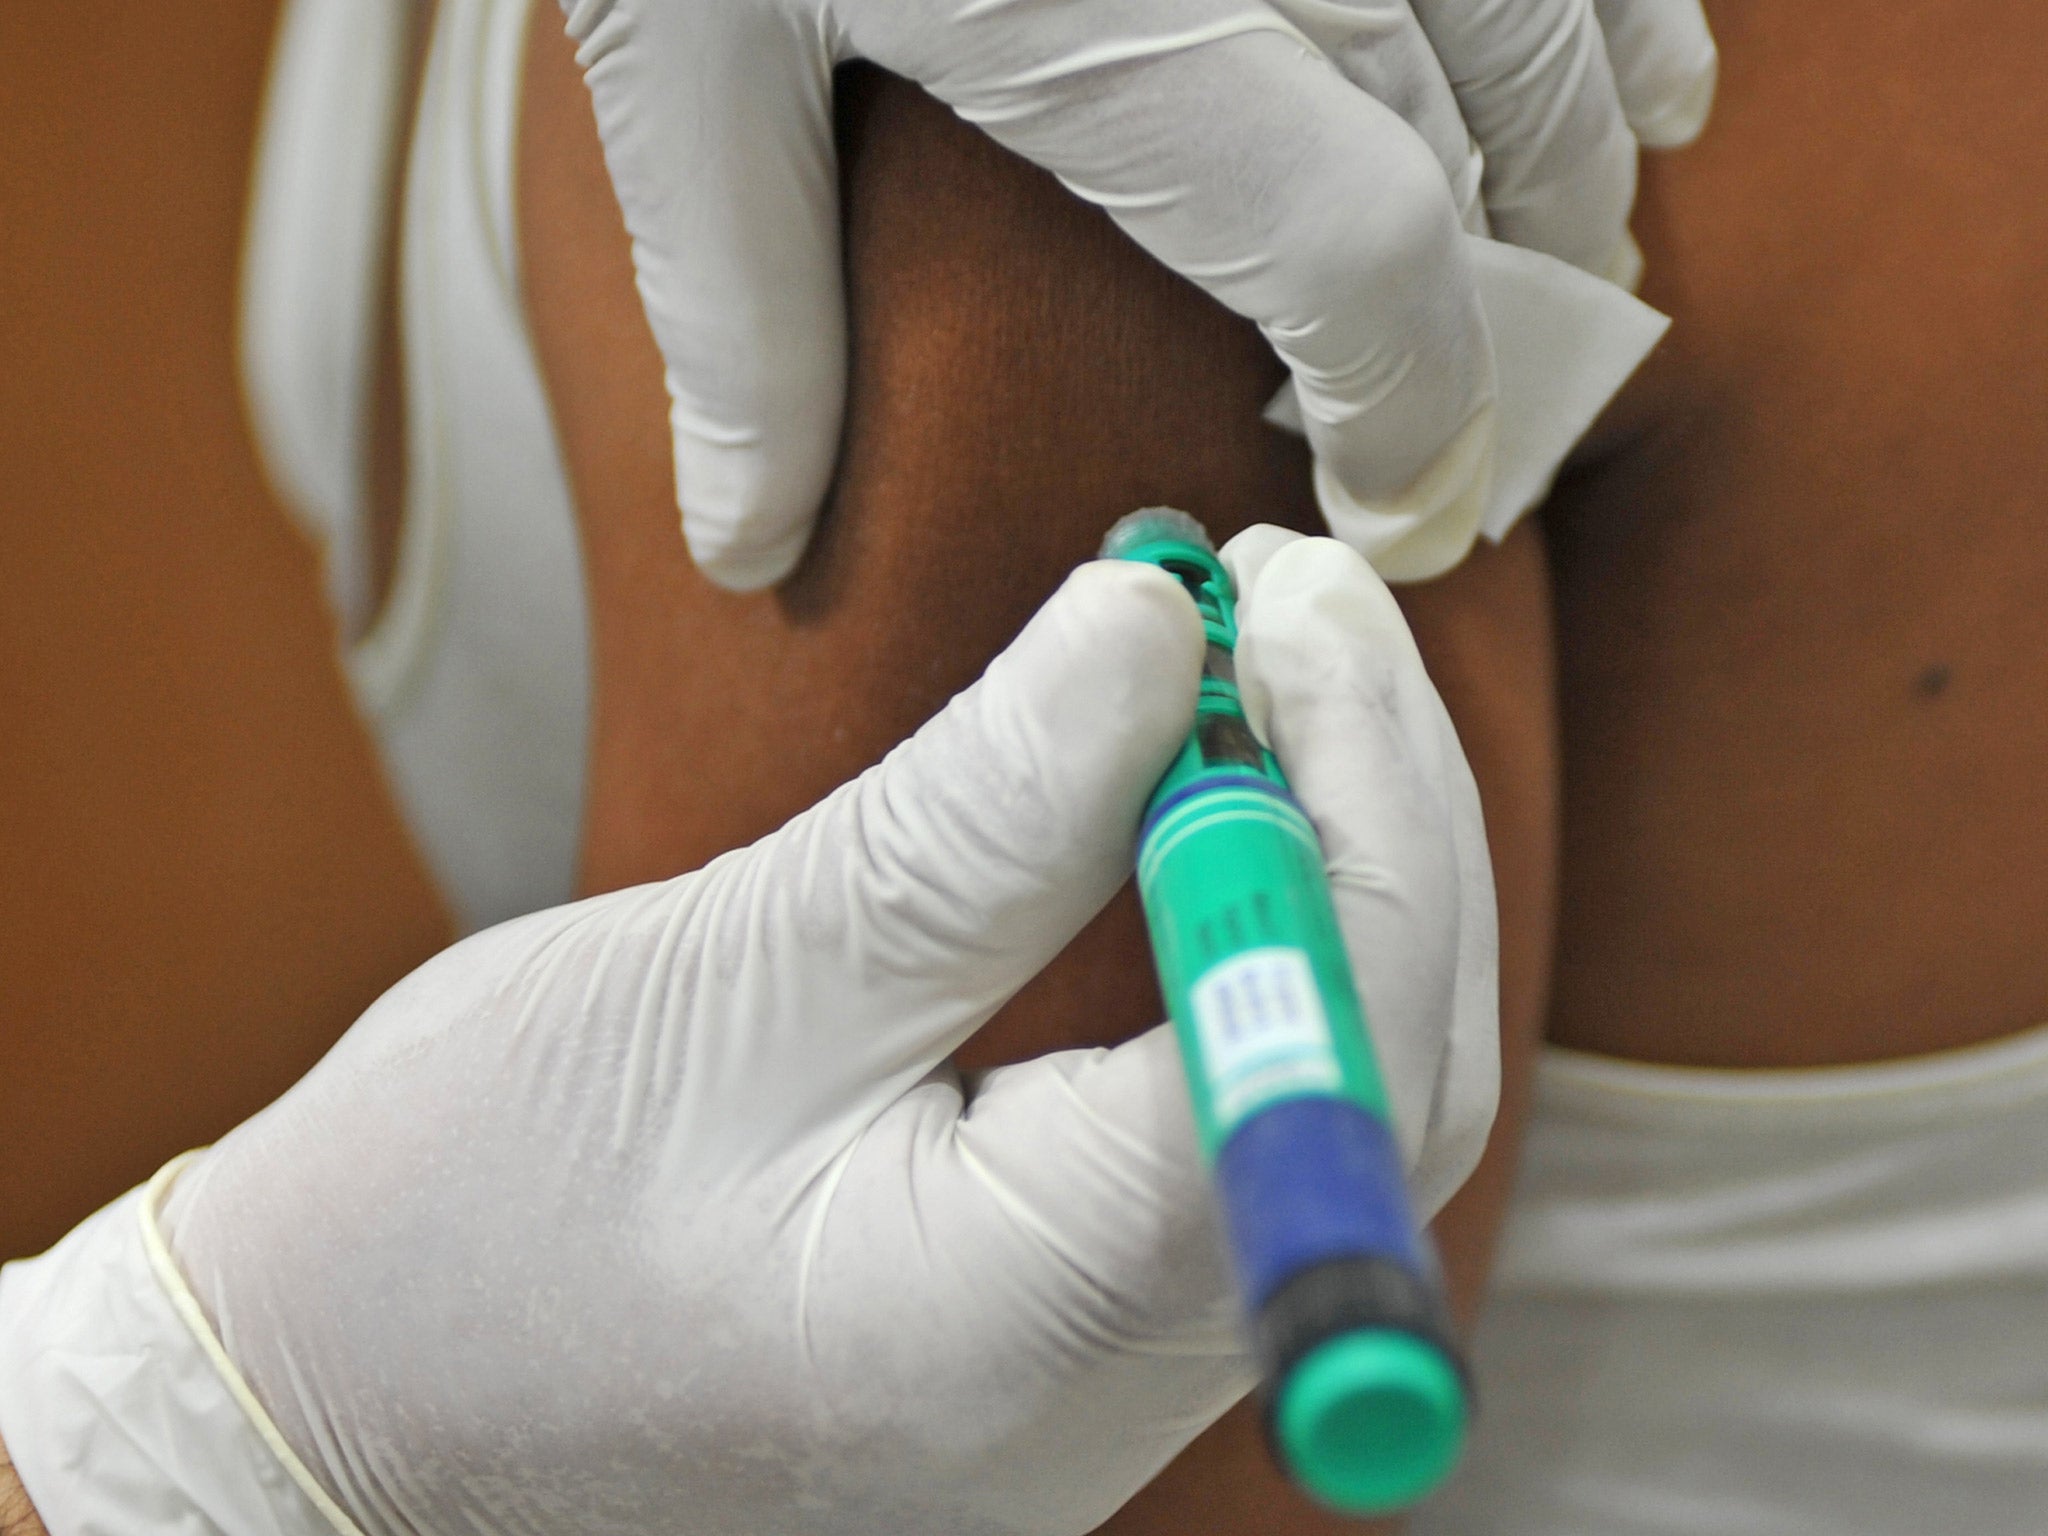 An injection of insulin is administered. File photo